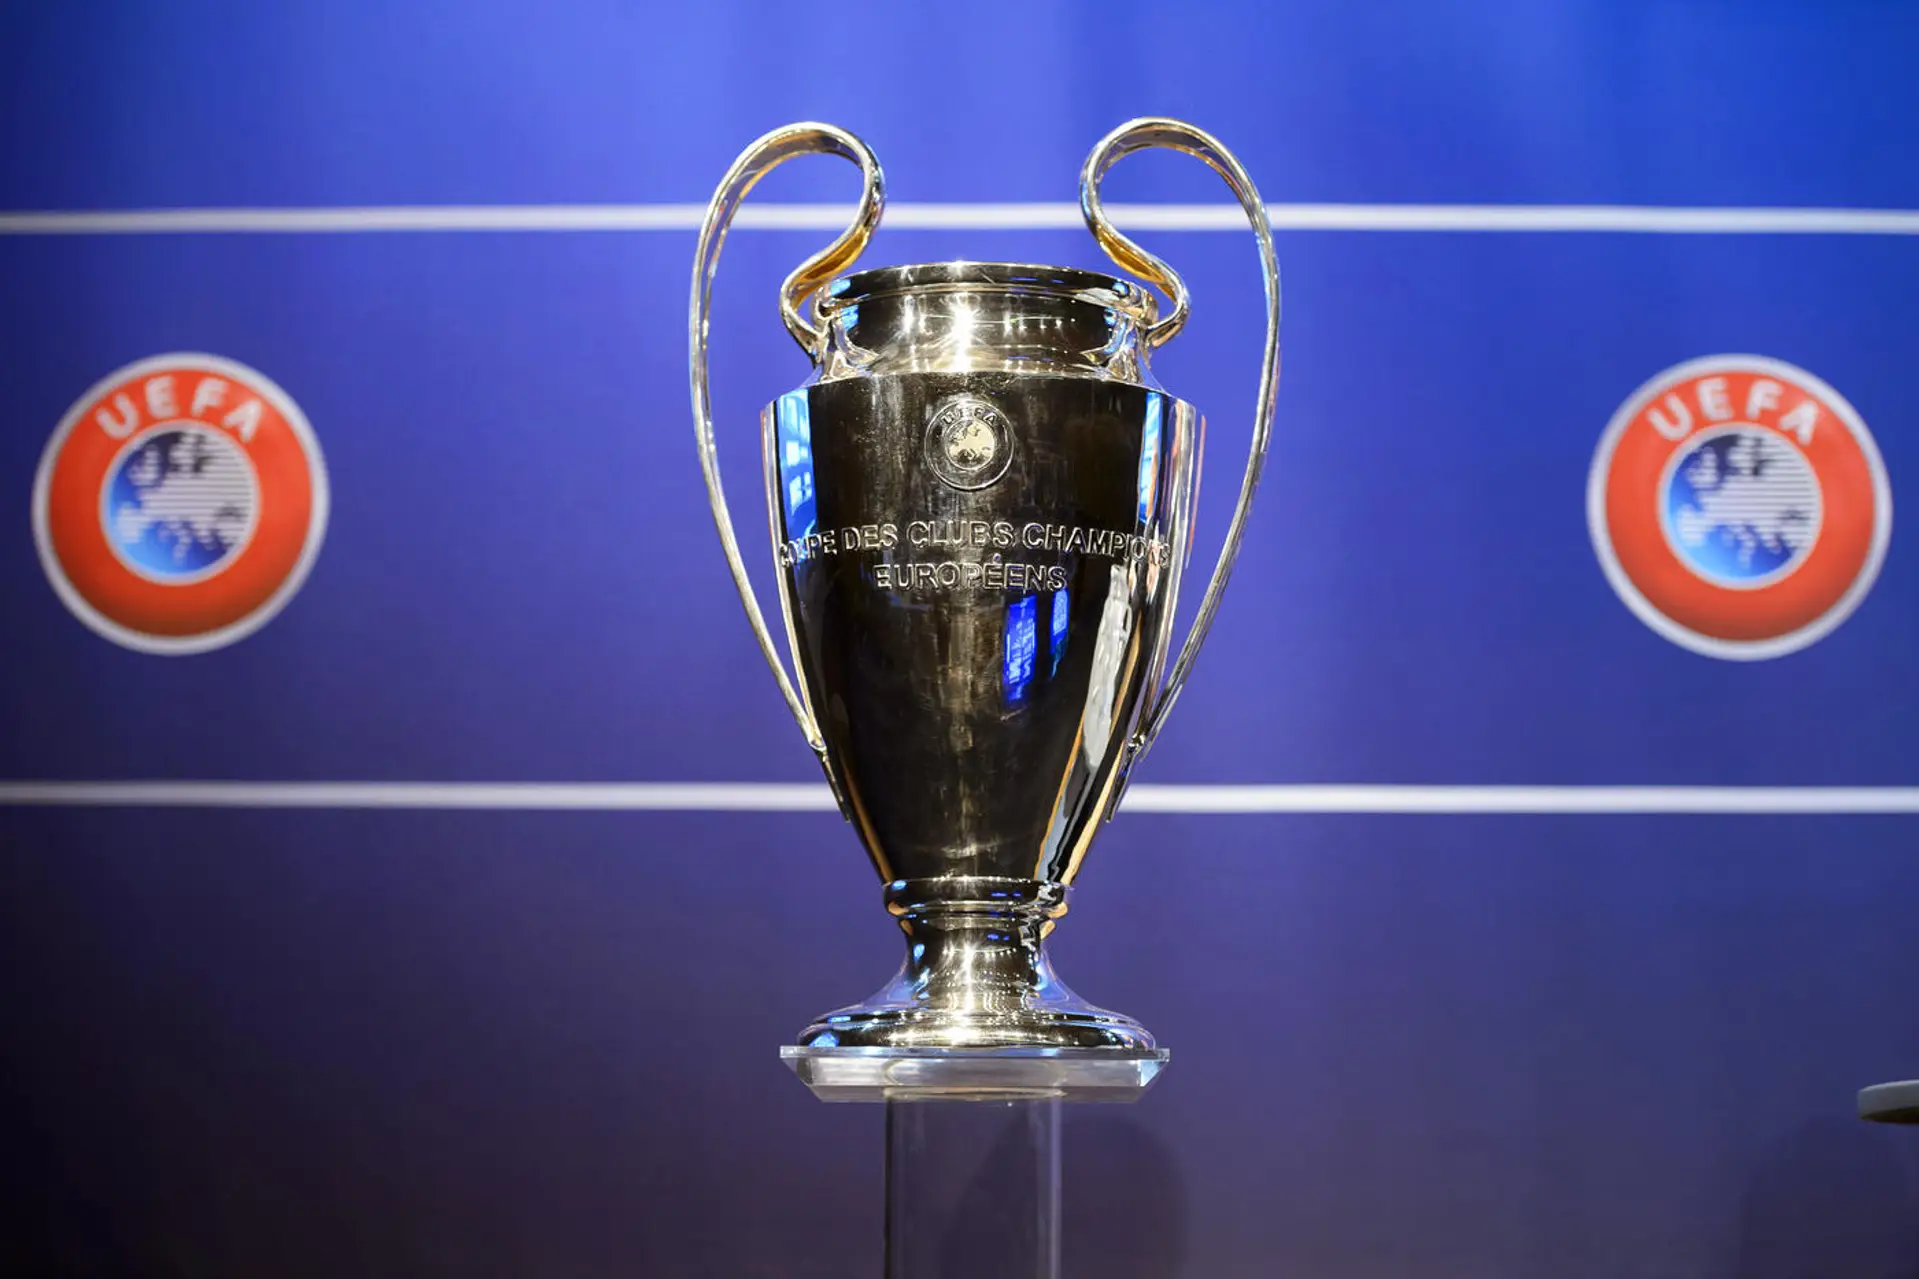 Who will win the 2021 UEFA Champions League Final?